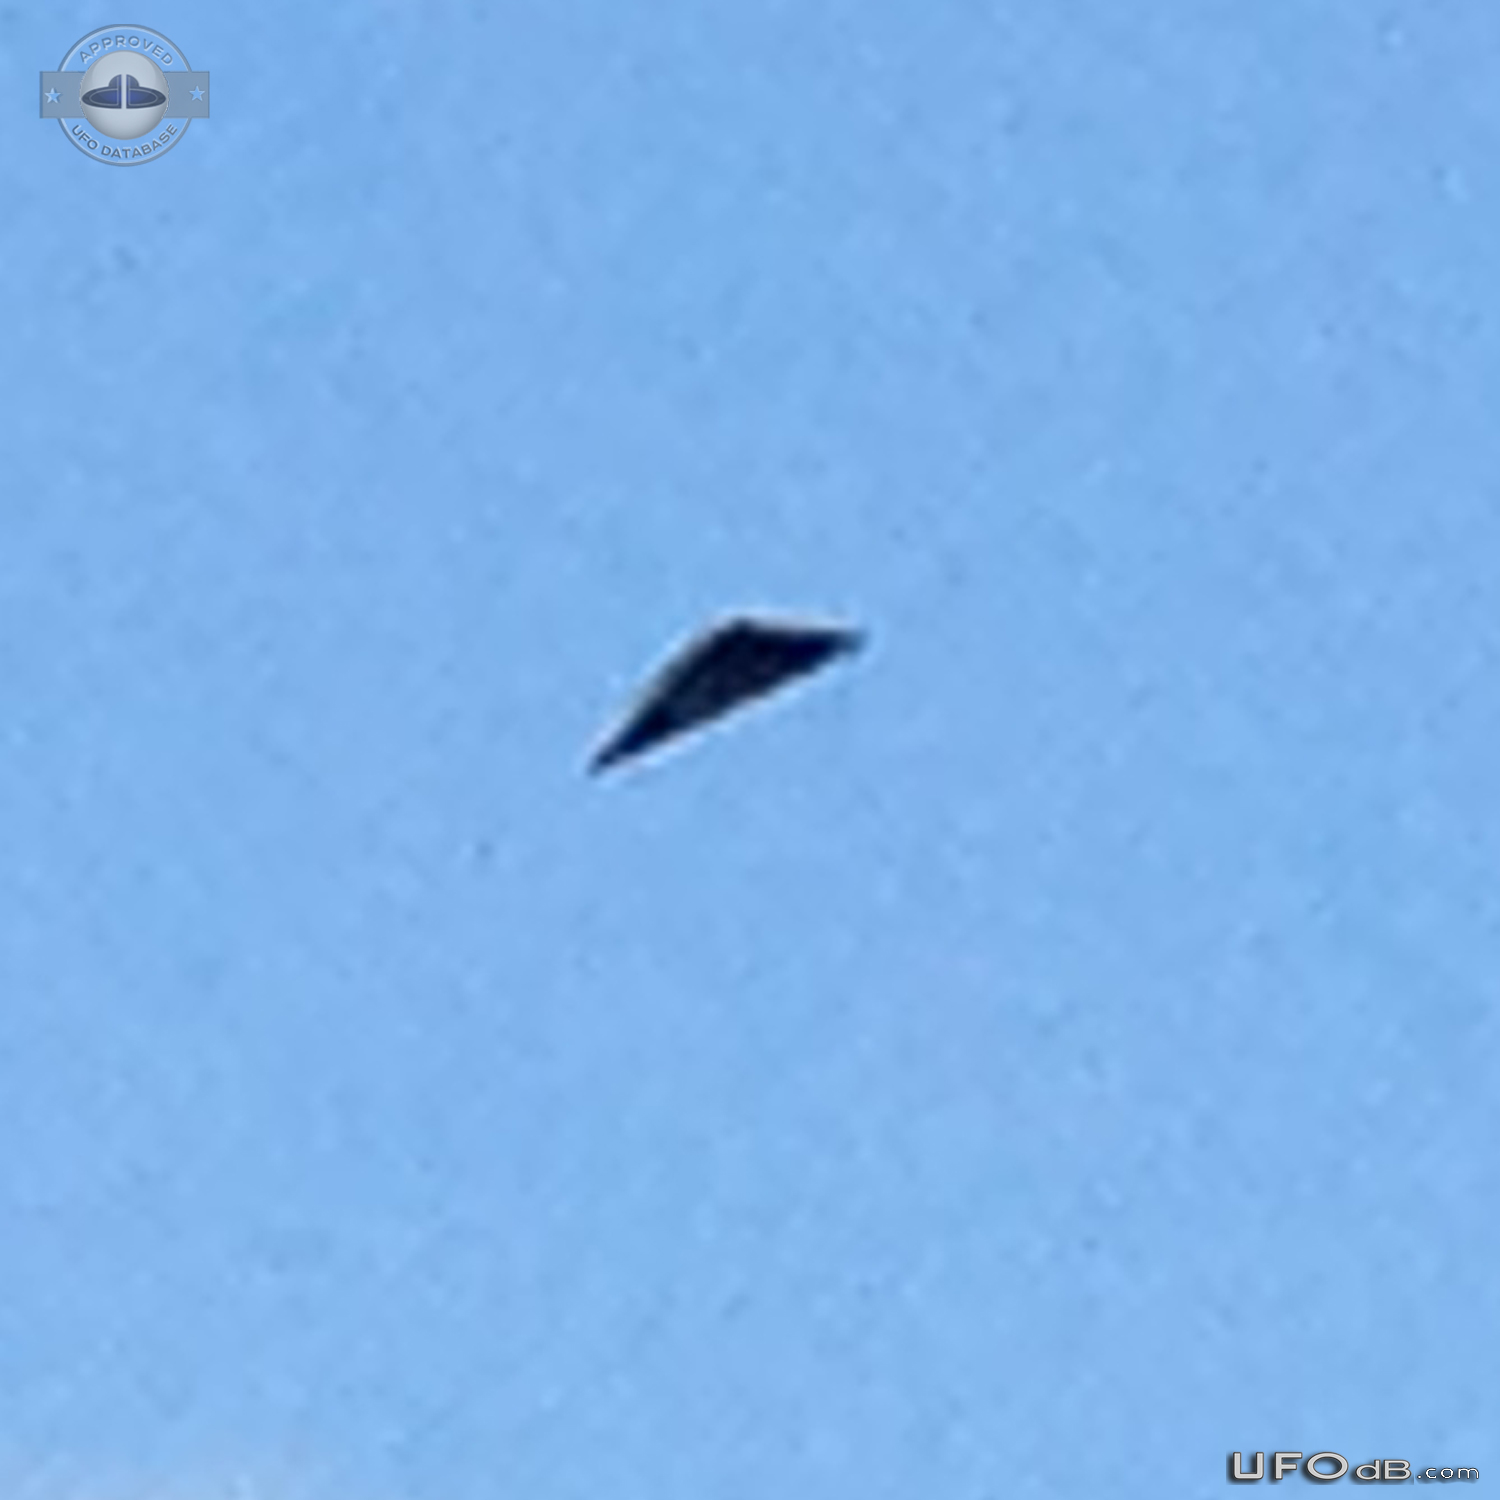 Triangular object hovering in Sky and did not move while observed - Au UFO Picture #736-6